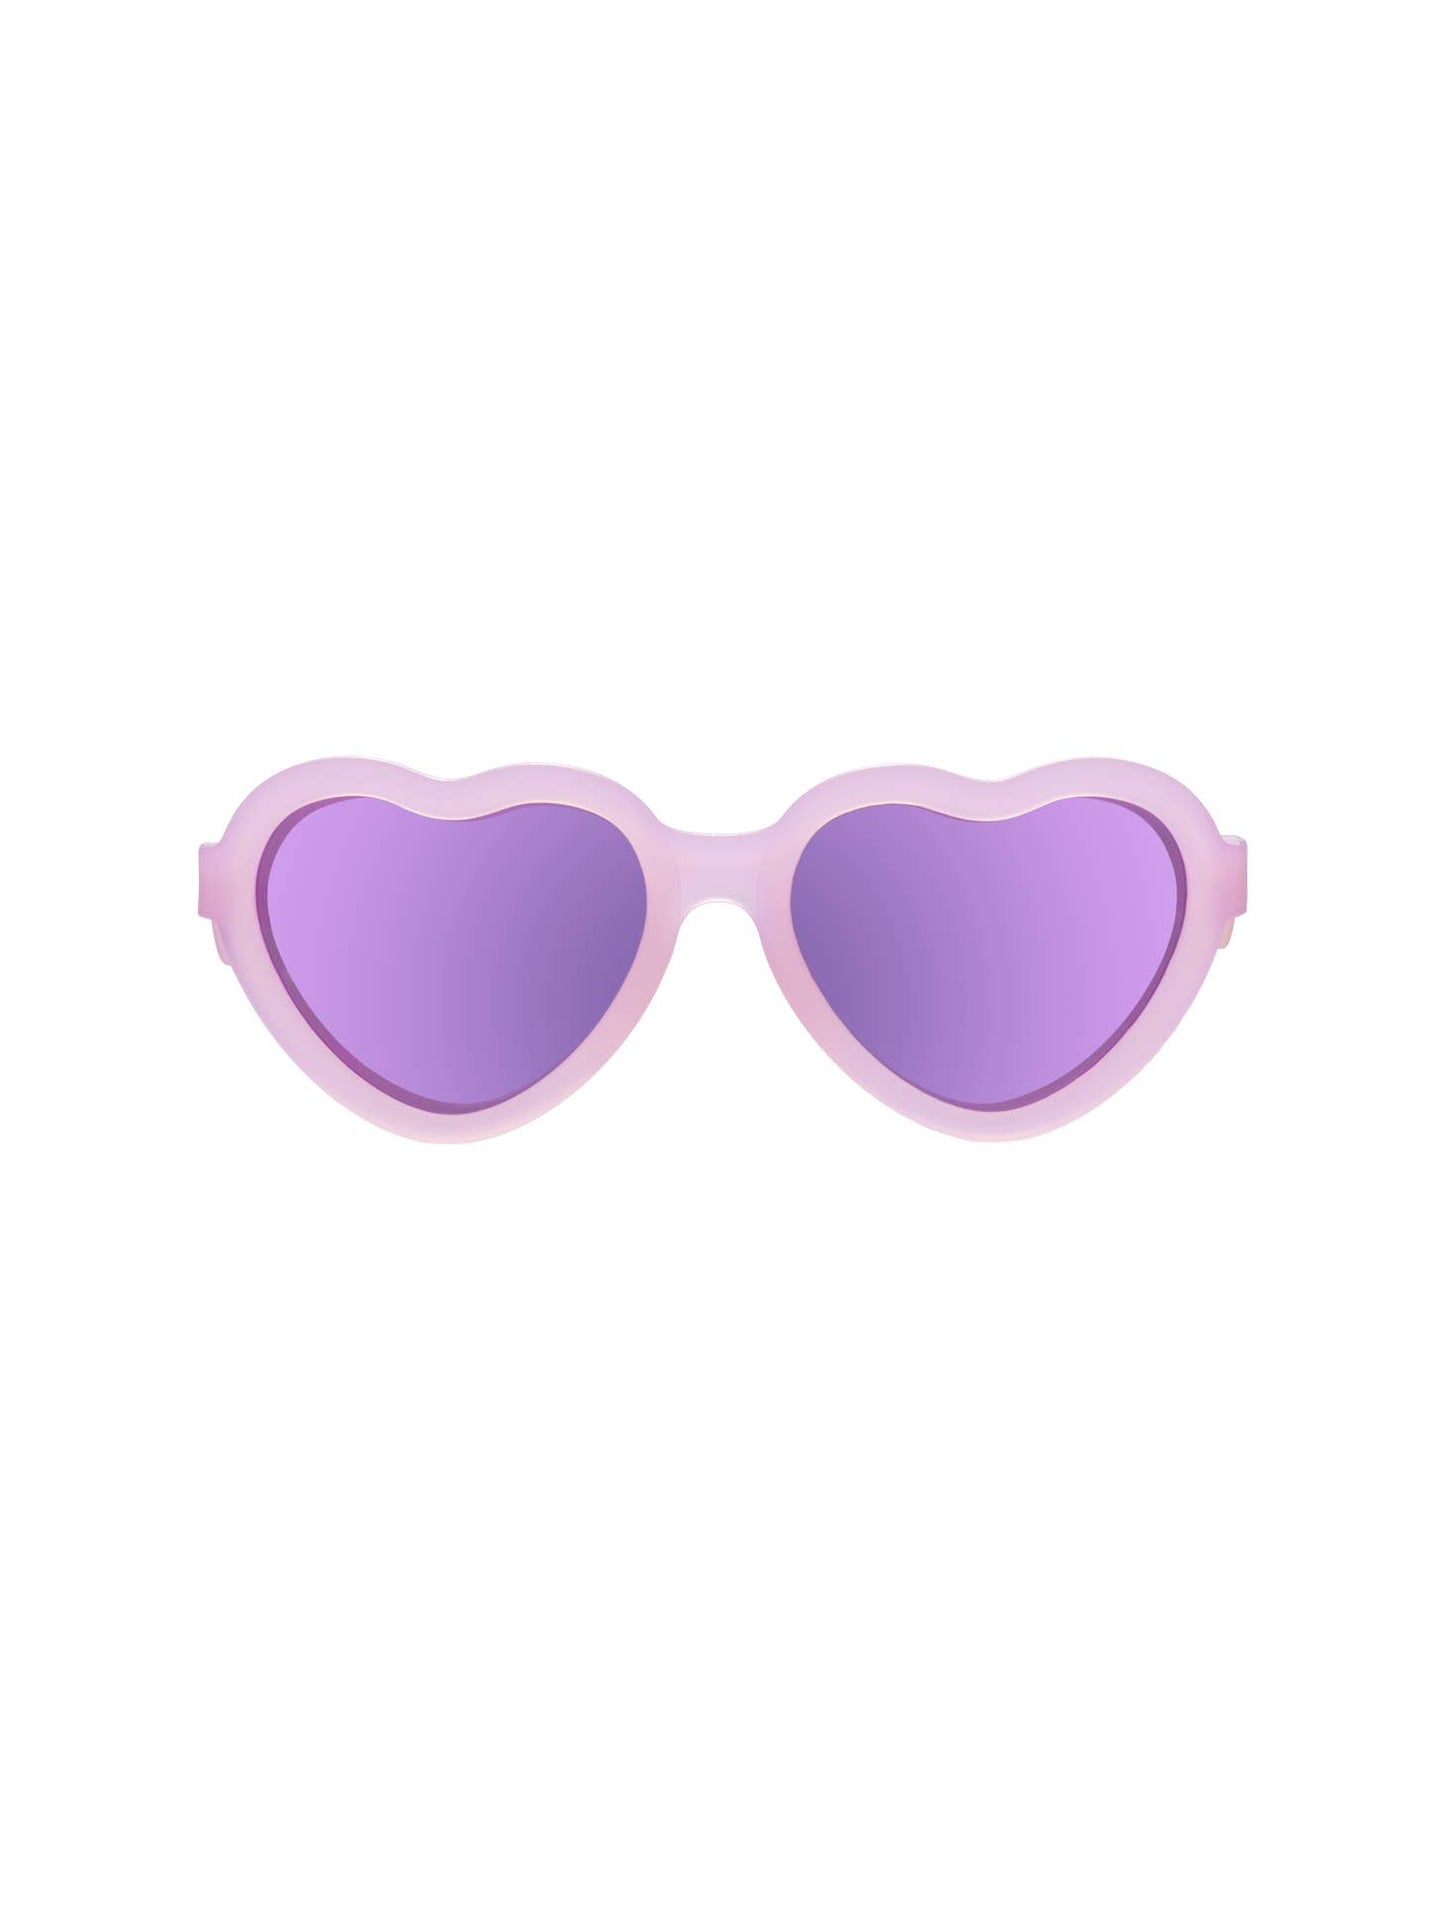 Babiators - Polarized Heart: Frosted Pink | Purple Mirrored Lens